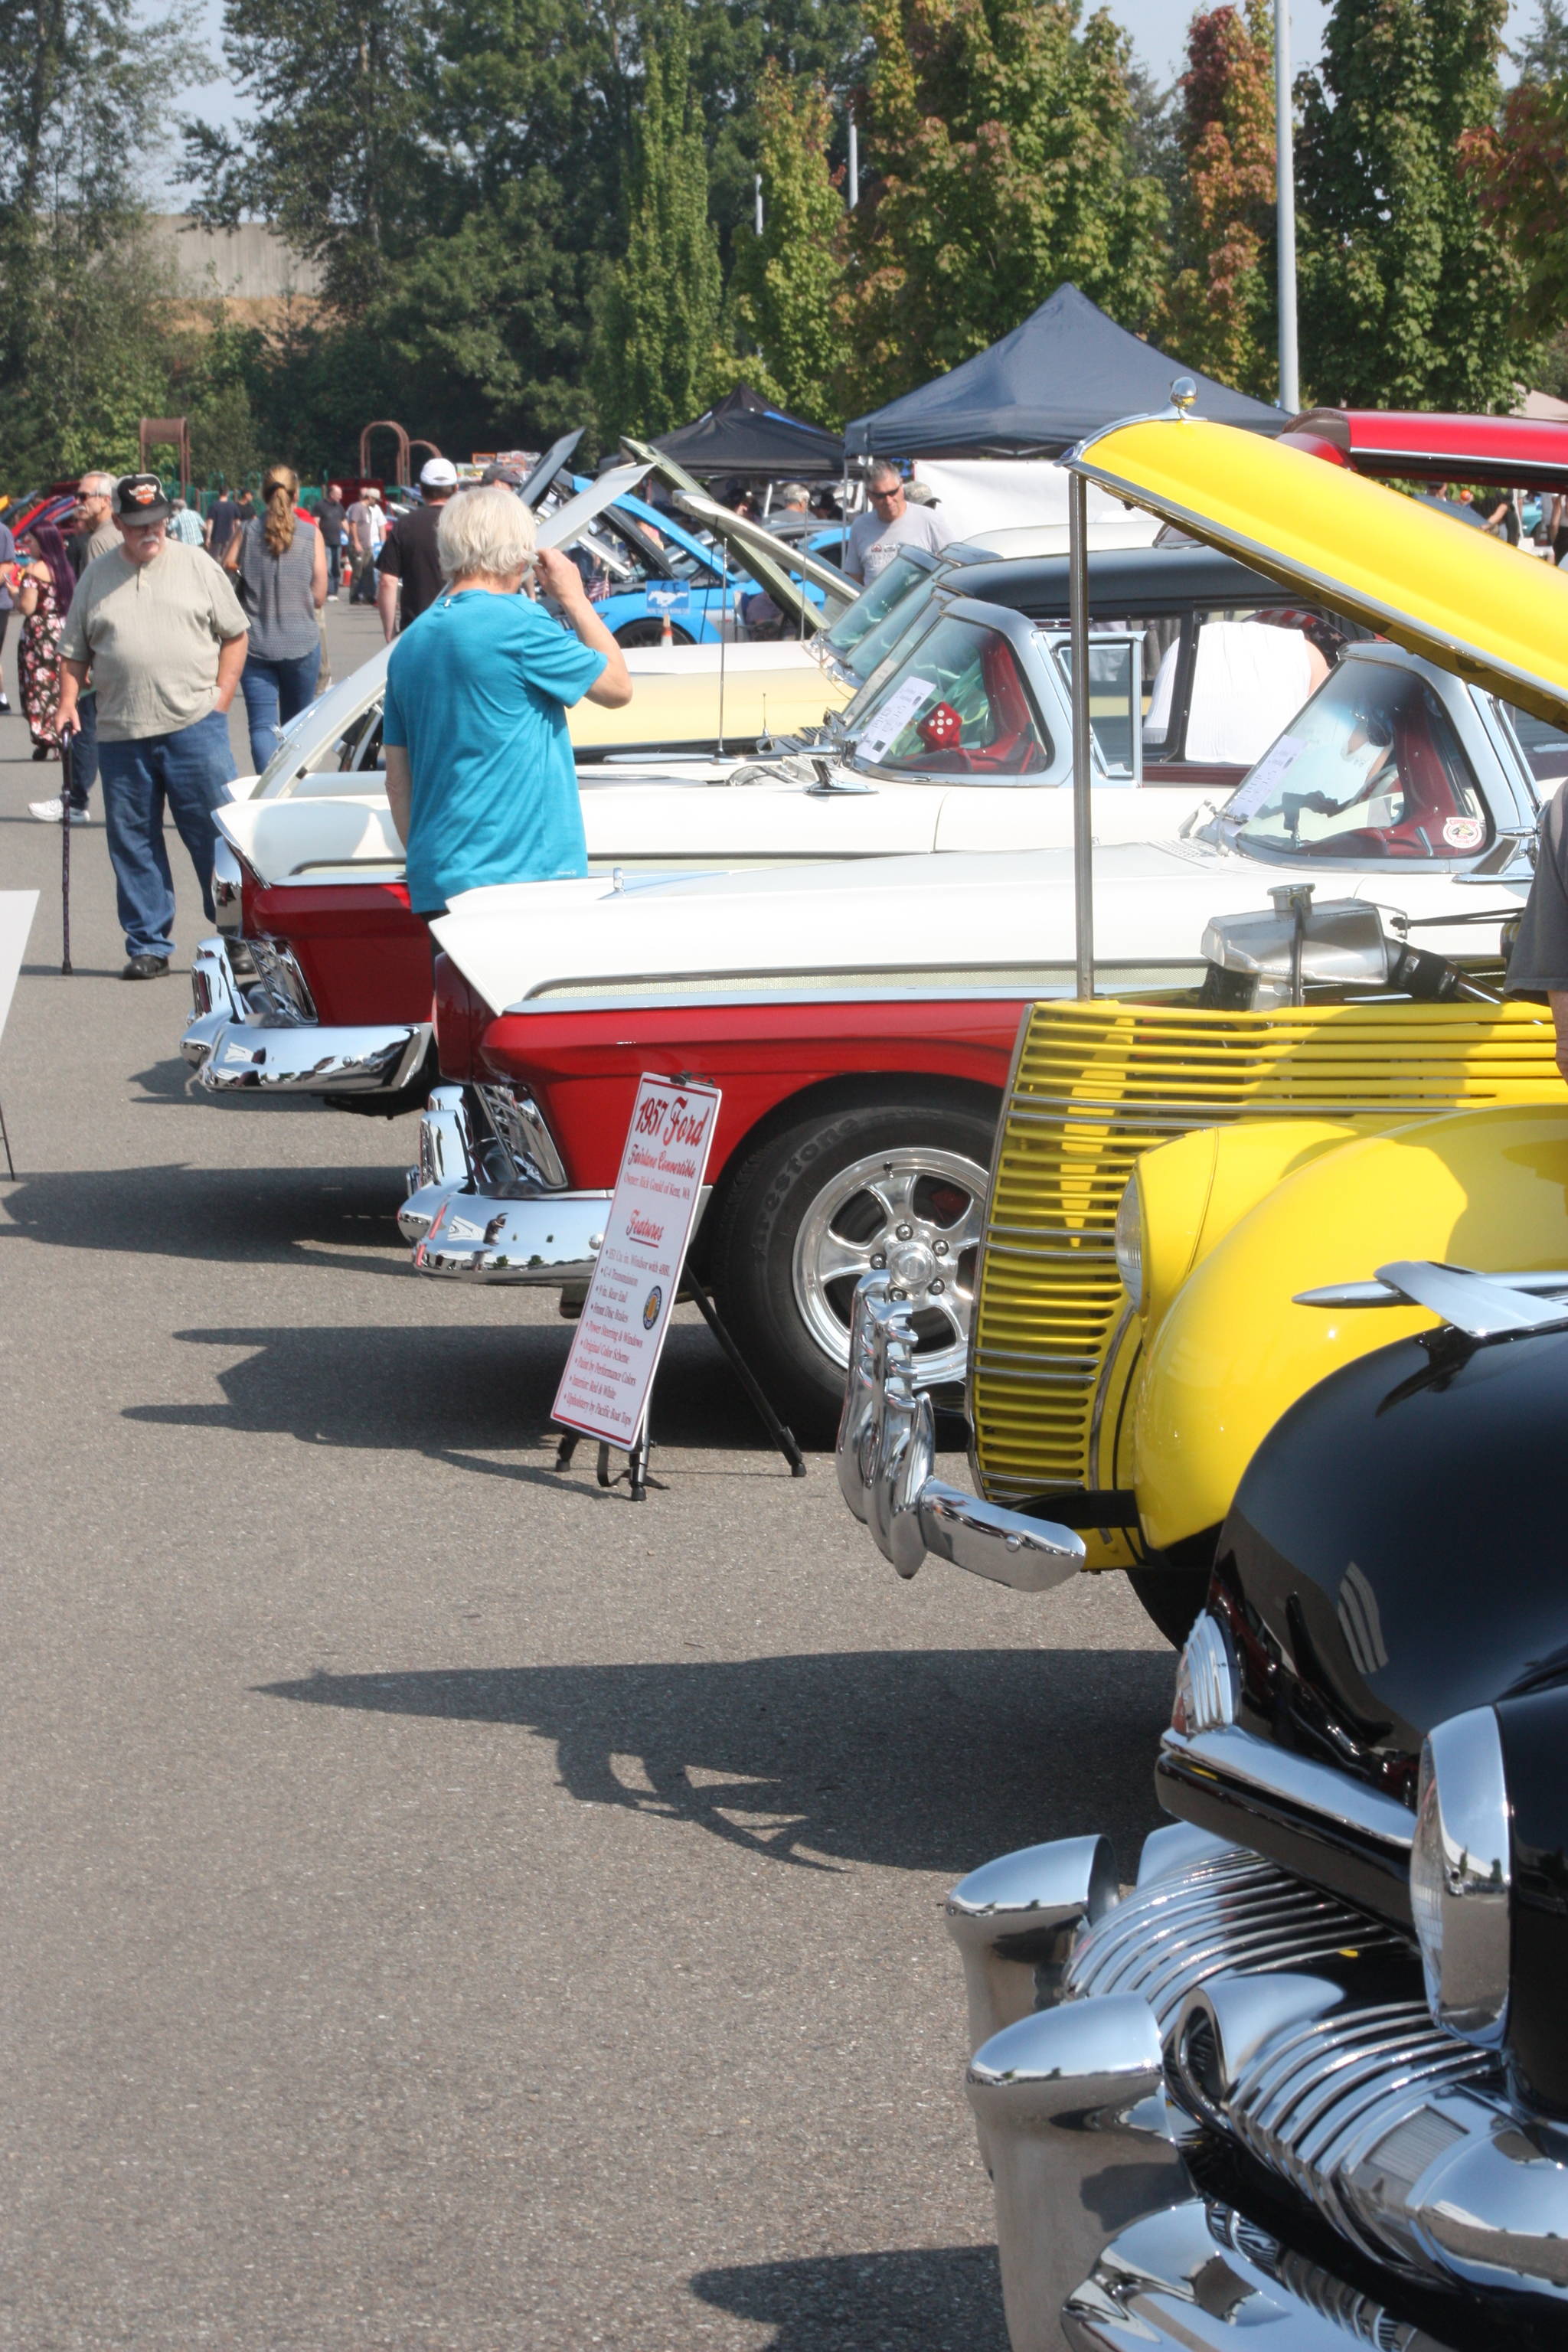 The All-Ford Show Mustang Roundup attracted a large collection of makes and models of yesteryear and today. MARK KLAAS, Kent Reporter